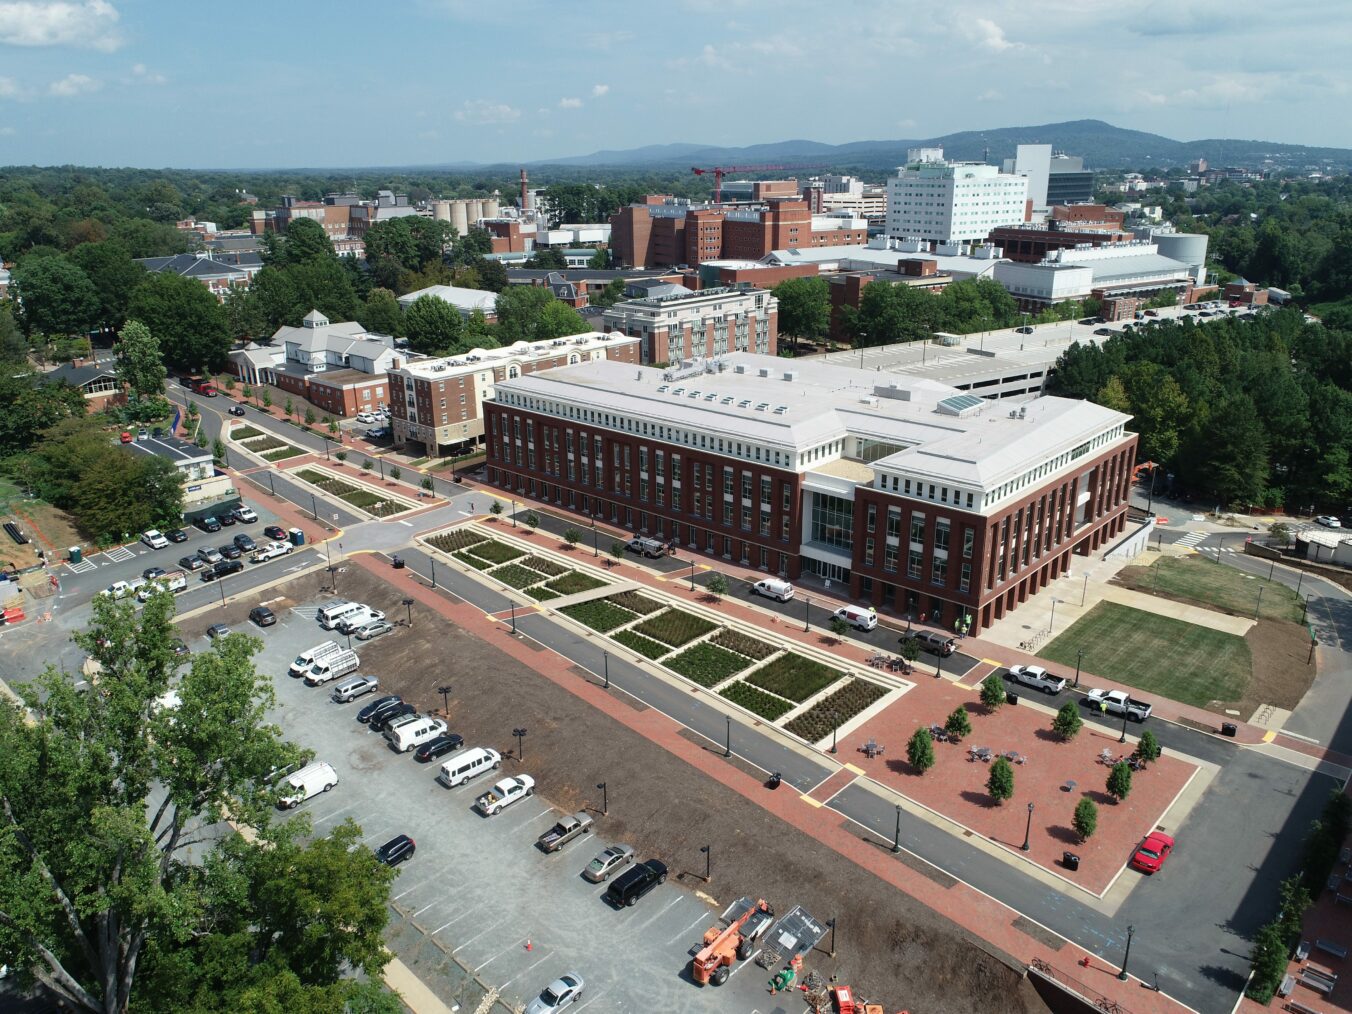 Aerial image of Brandon Avenue at University of Virginia overlooking Student Health + Wellness Center and Green Street Infrastructure project